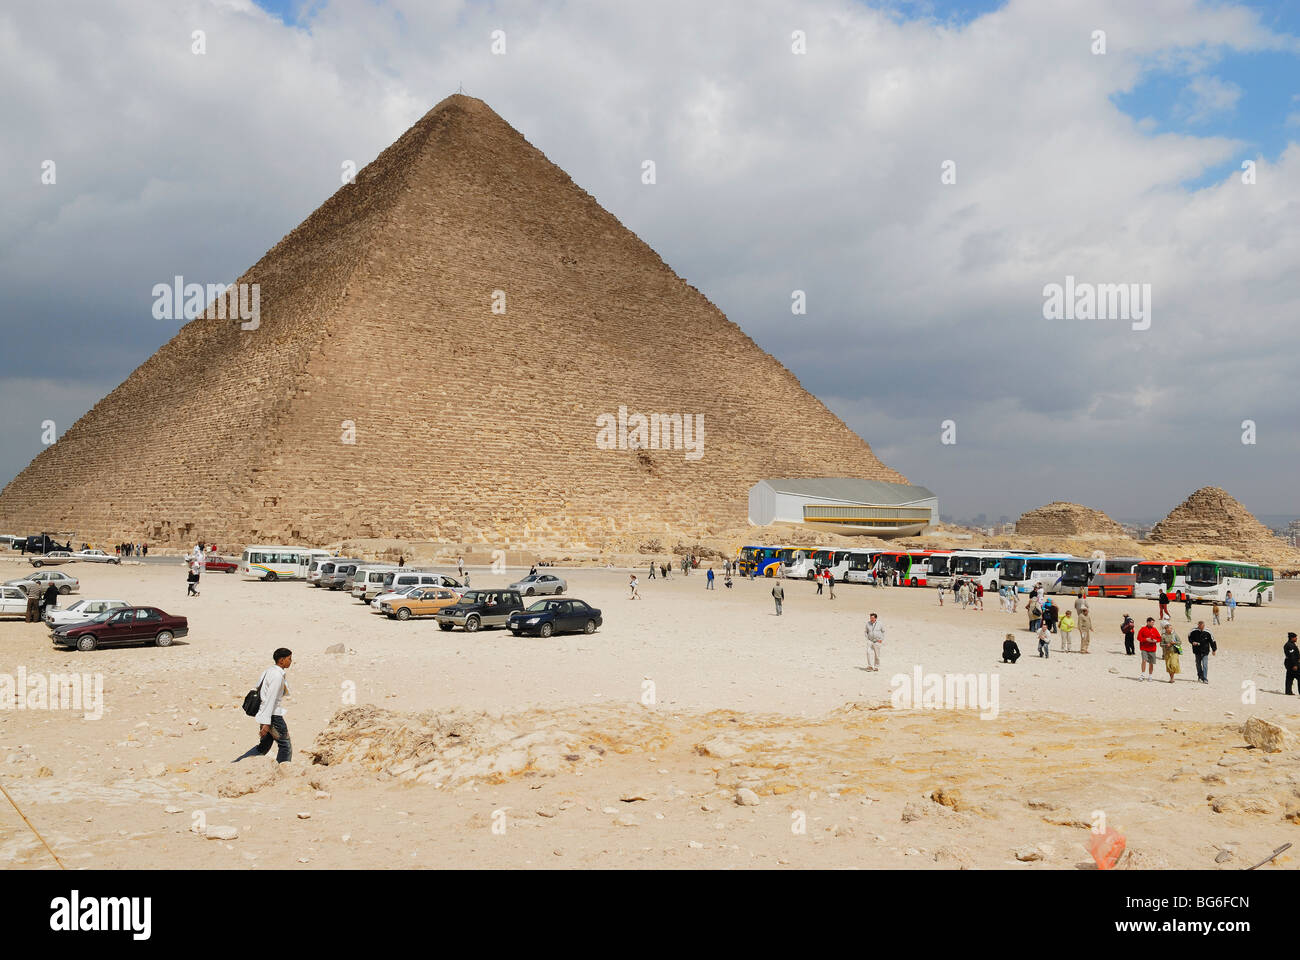 The Great Pyramid of Giza also called the Pyramid of Khufu and the Pyramid of Cheops, Egypt Stock Photo